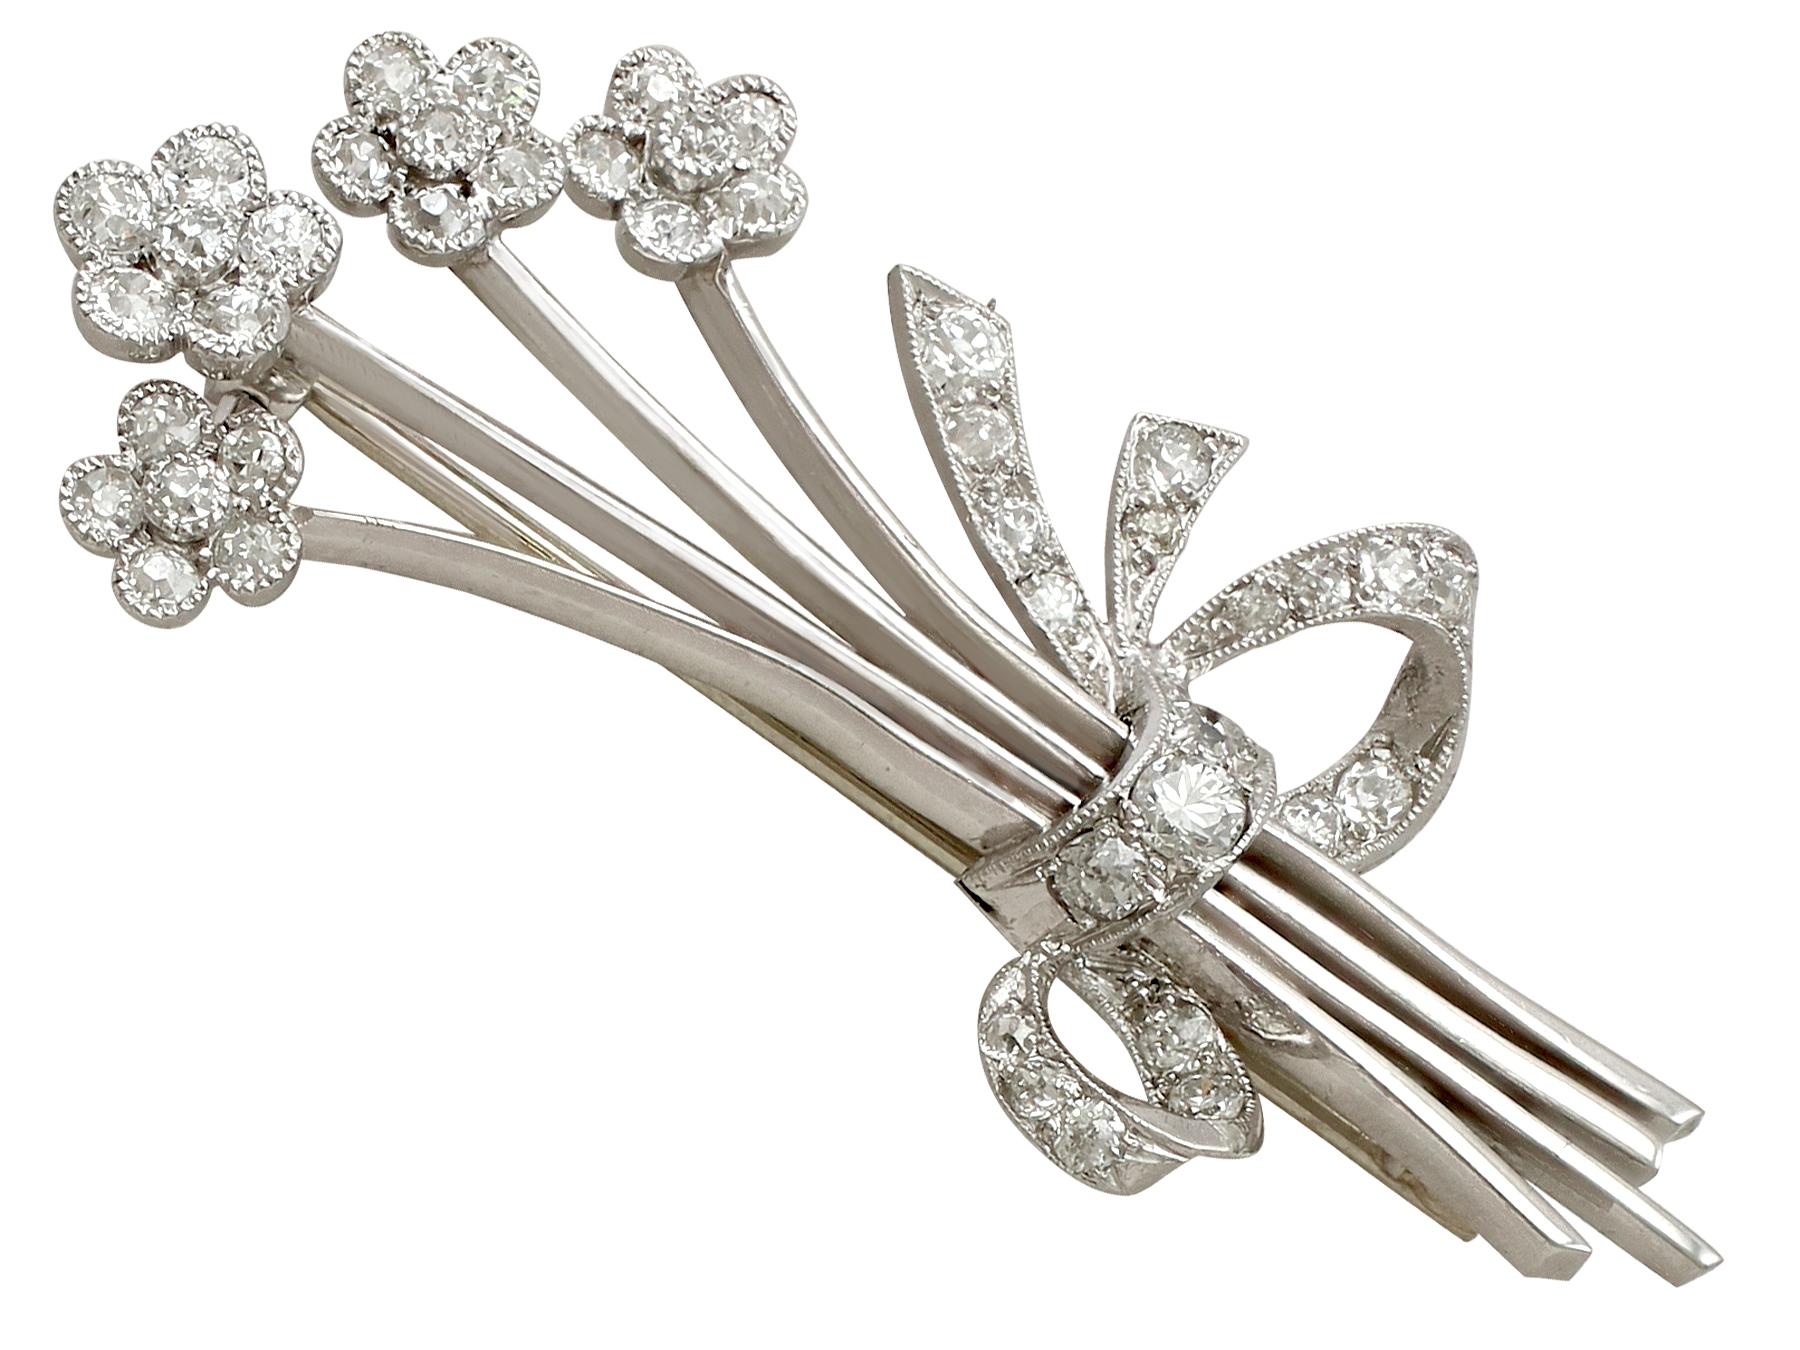 A stunning antique 1930s 1.26 carat diamond and platinum spray brooch; part of our diverse antique jewellery and estate jewelry collections.

This stunning, fine and impressive diamond brooch has been crafted in platinum.

The brooch has been